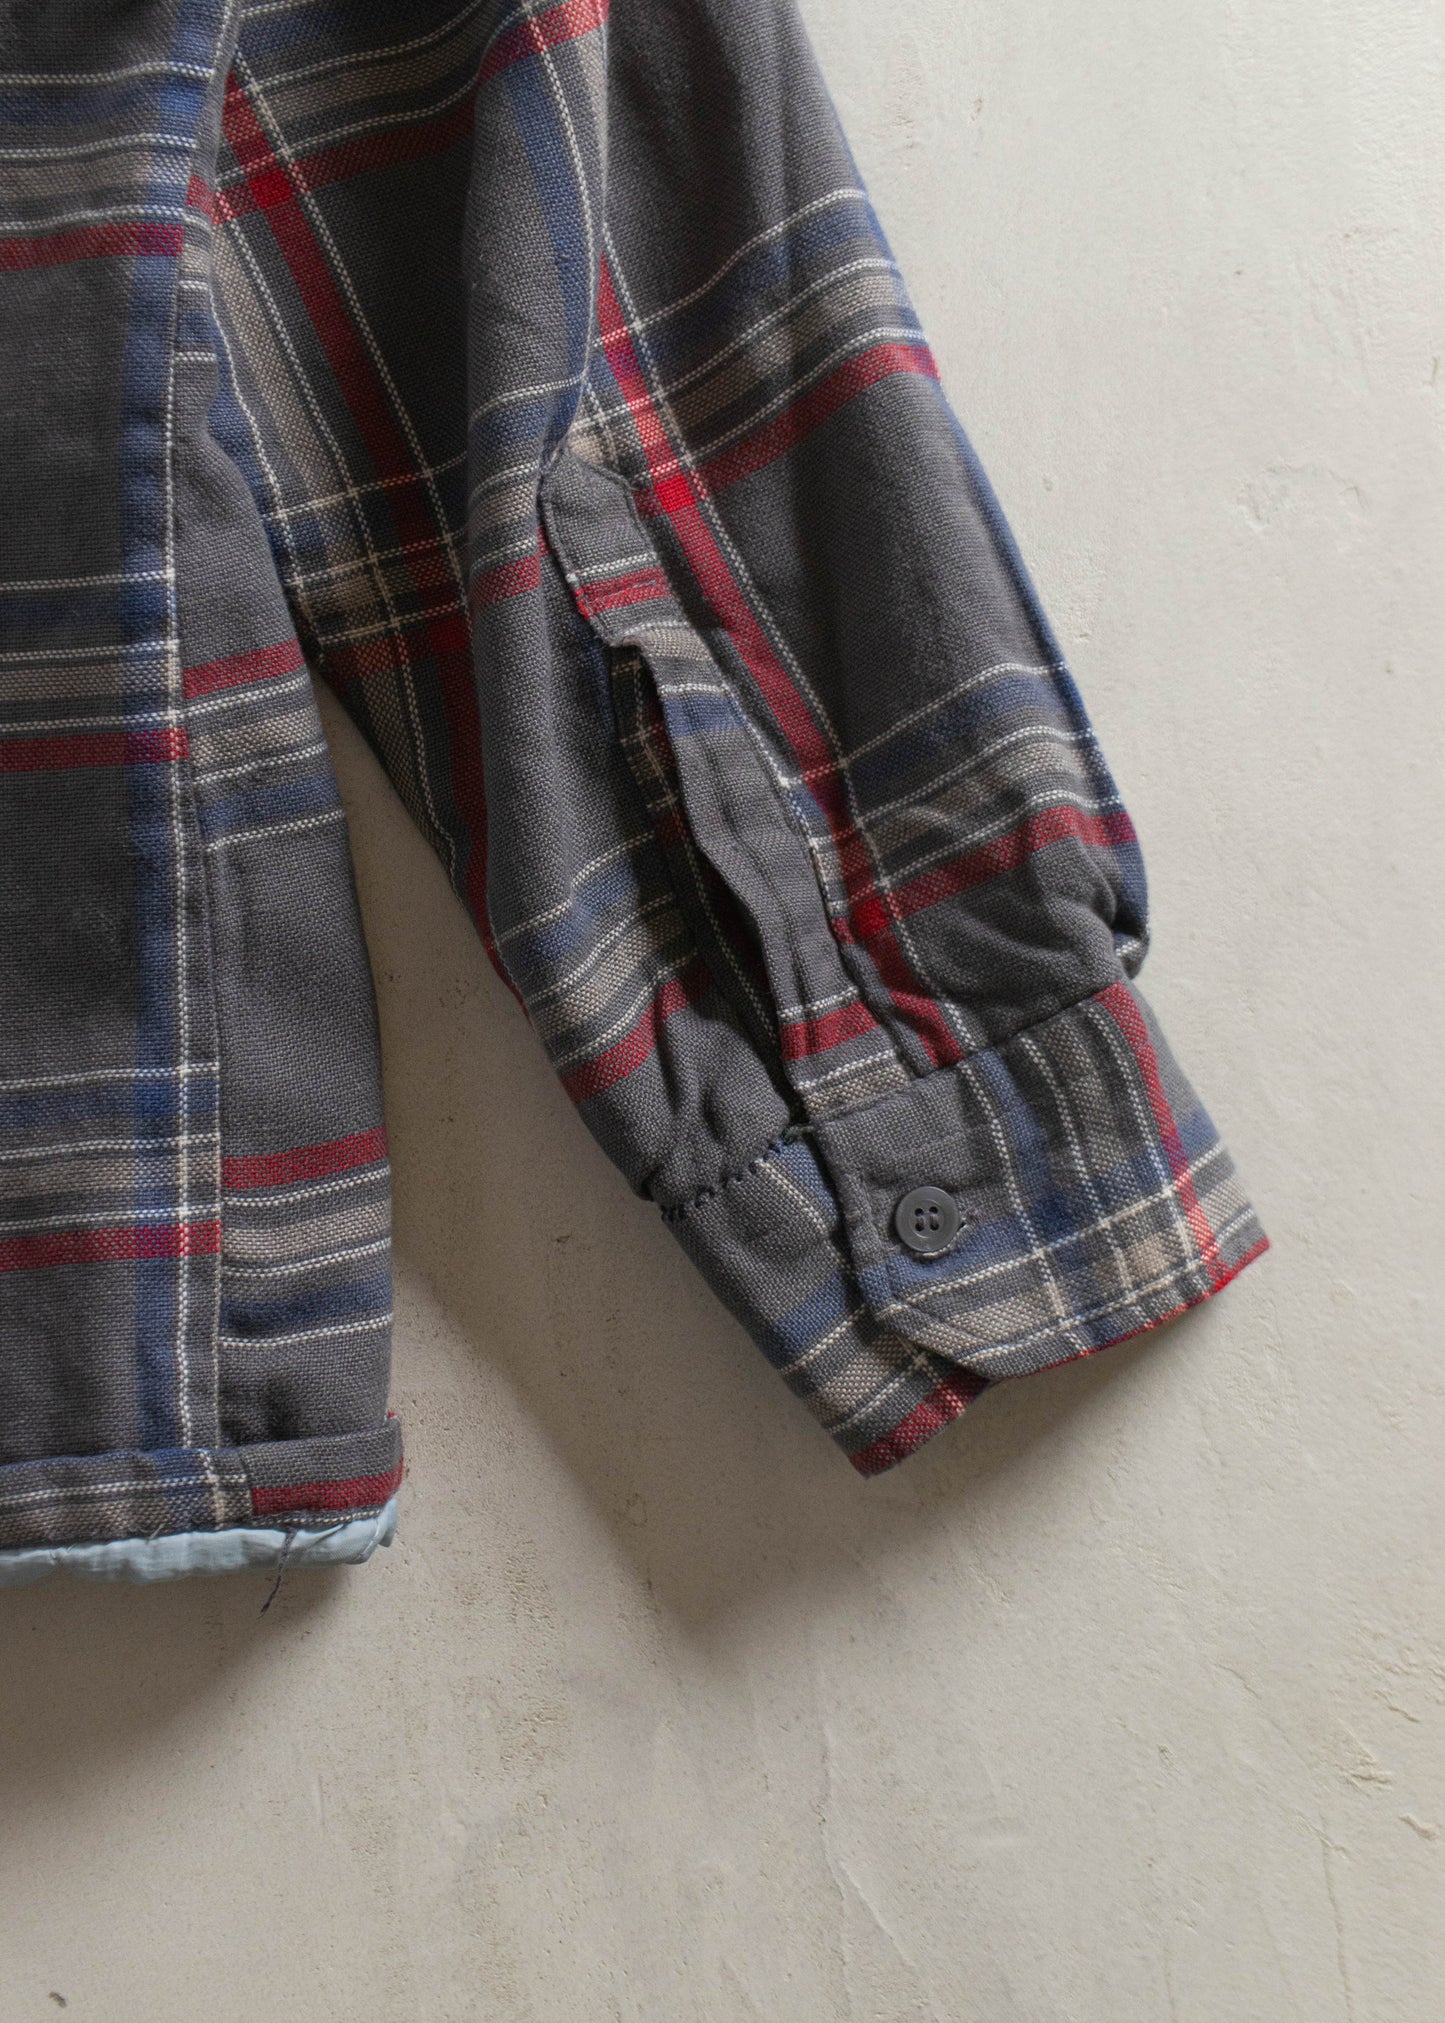 Vintage 1990s Cotton Padded Flannel Jacket Size XS/S